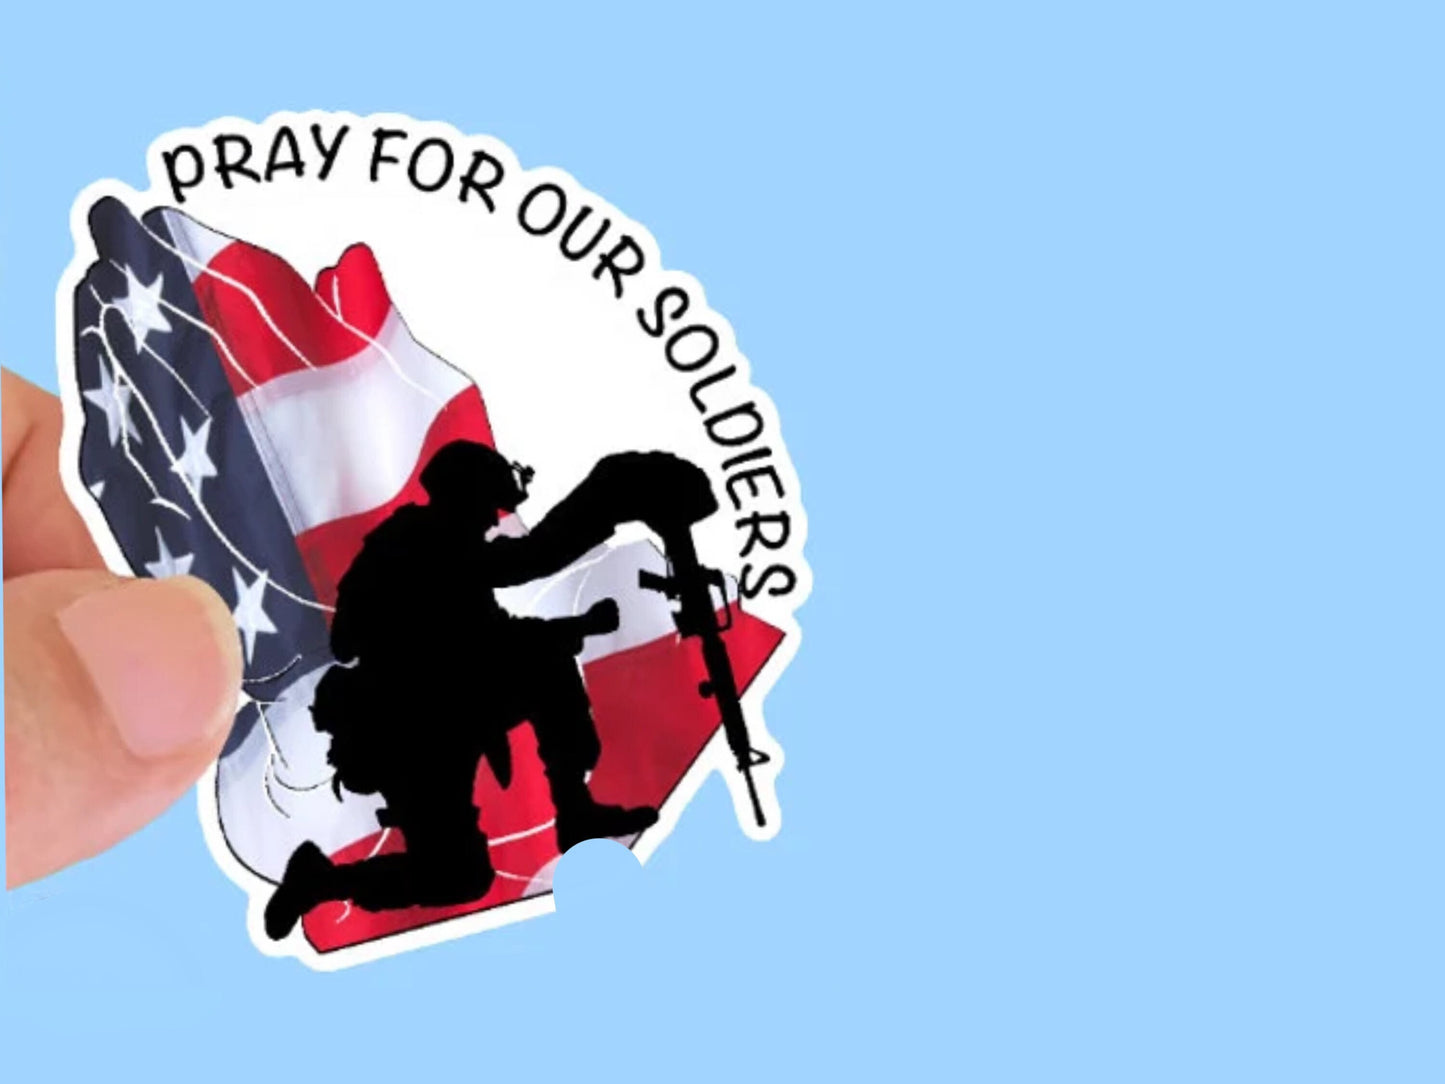 Kneeling Soldier Pray for our Soldiers , Christian Faith UV/ Waterproof Vinyl Sticker/ Decal- Choice of Size, Single or Bulk qty